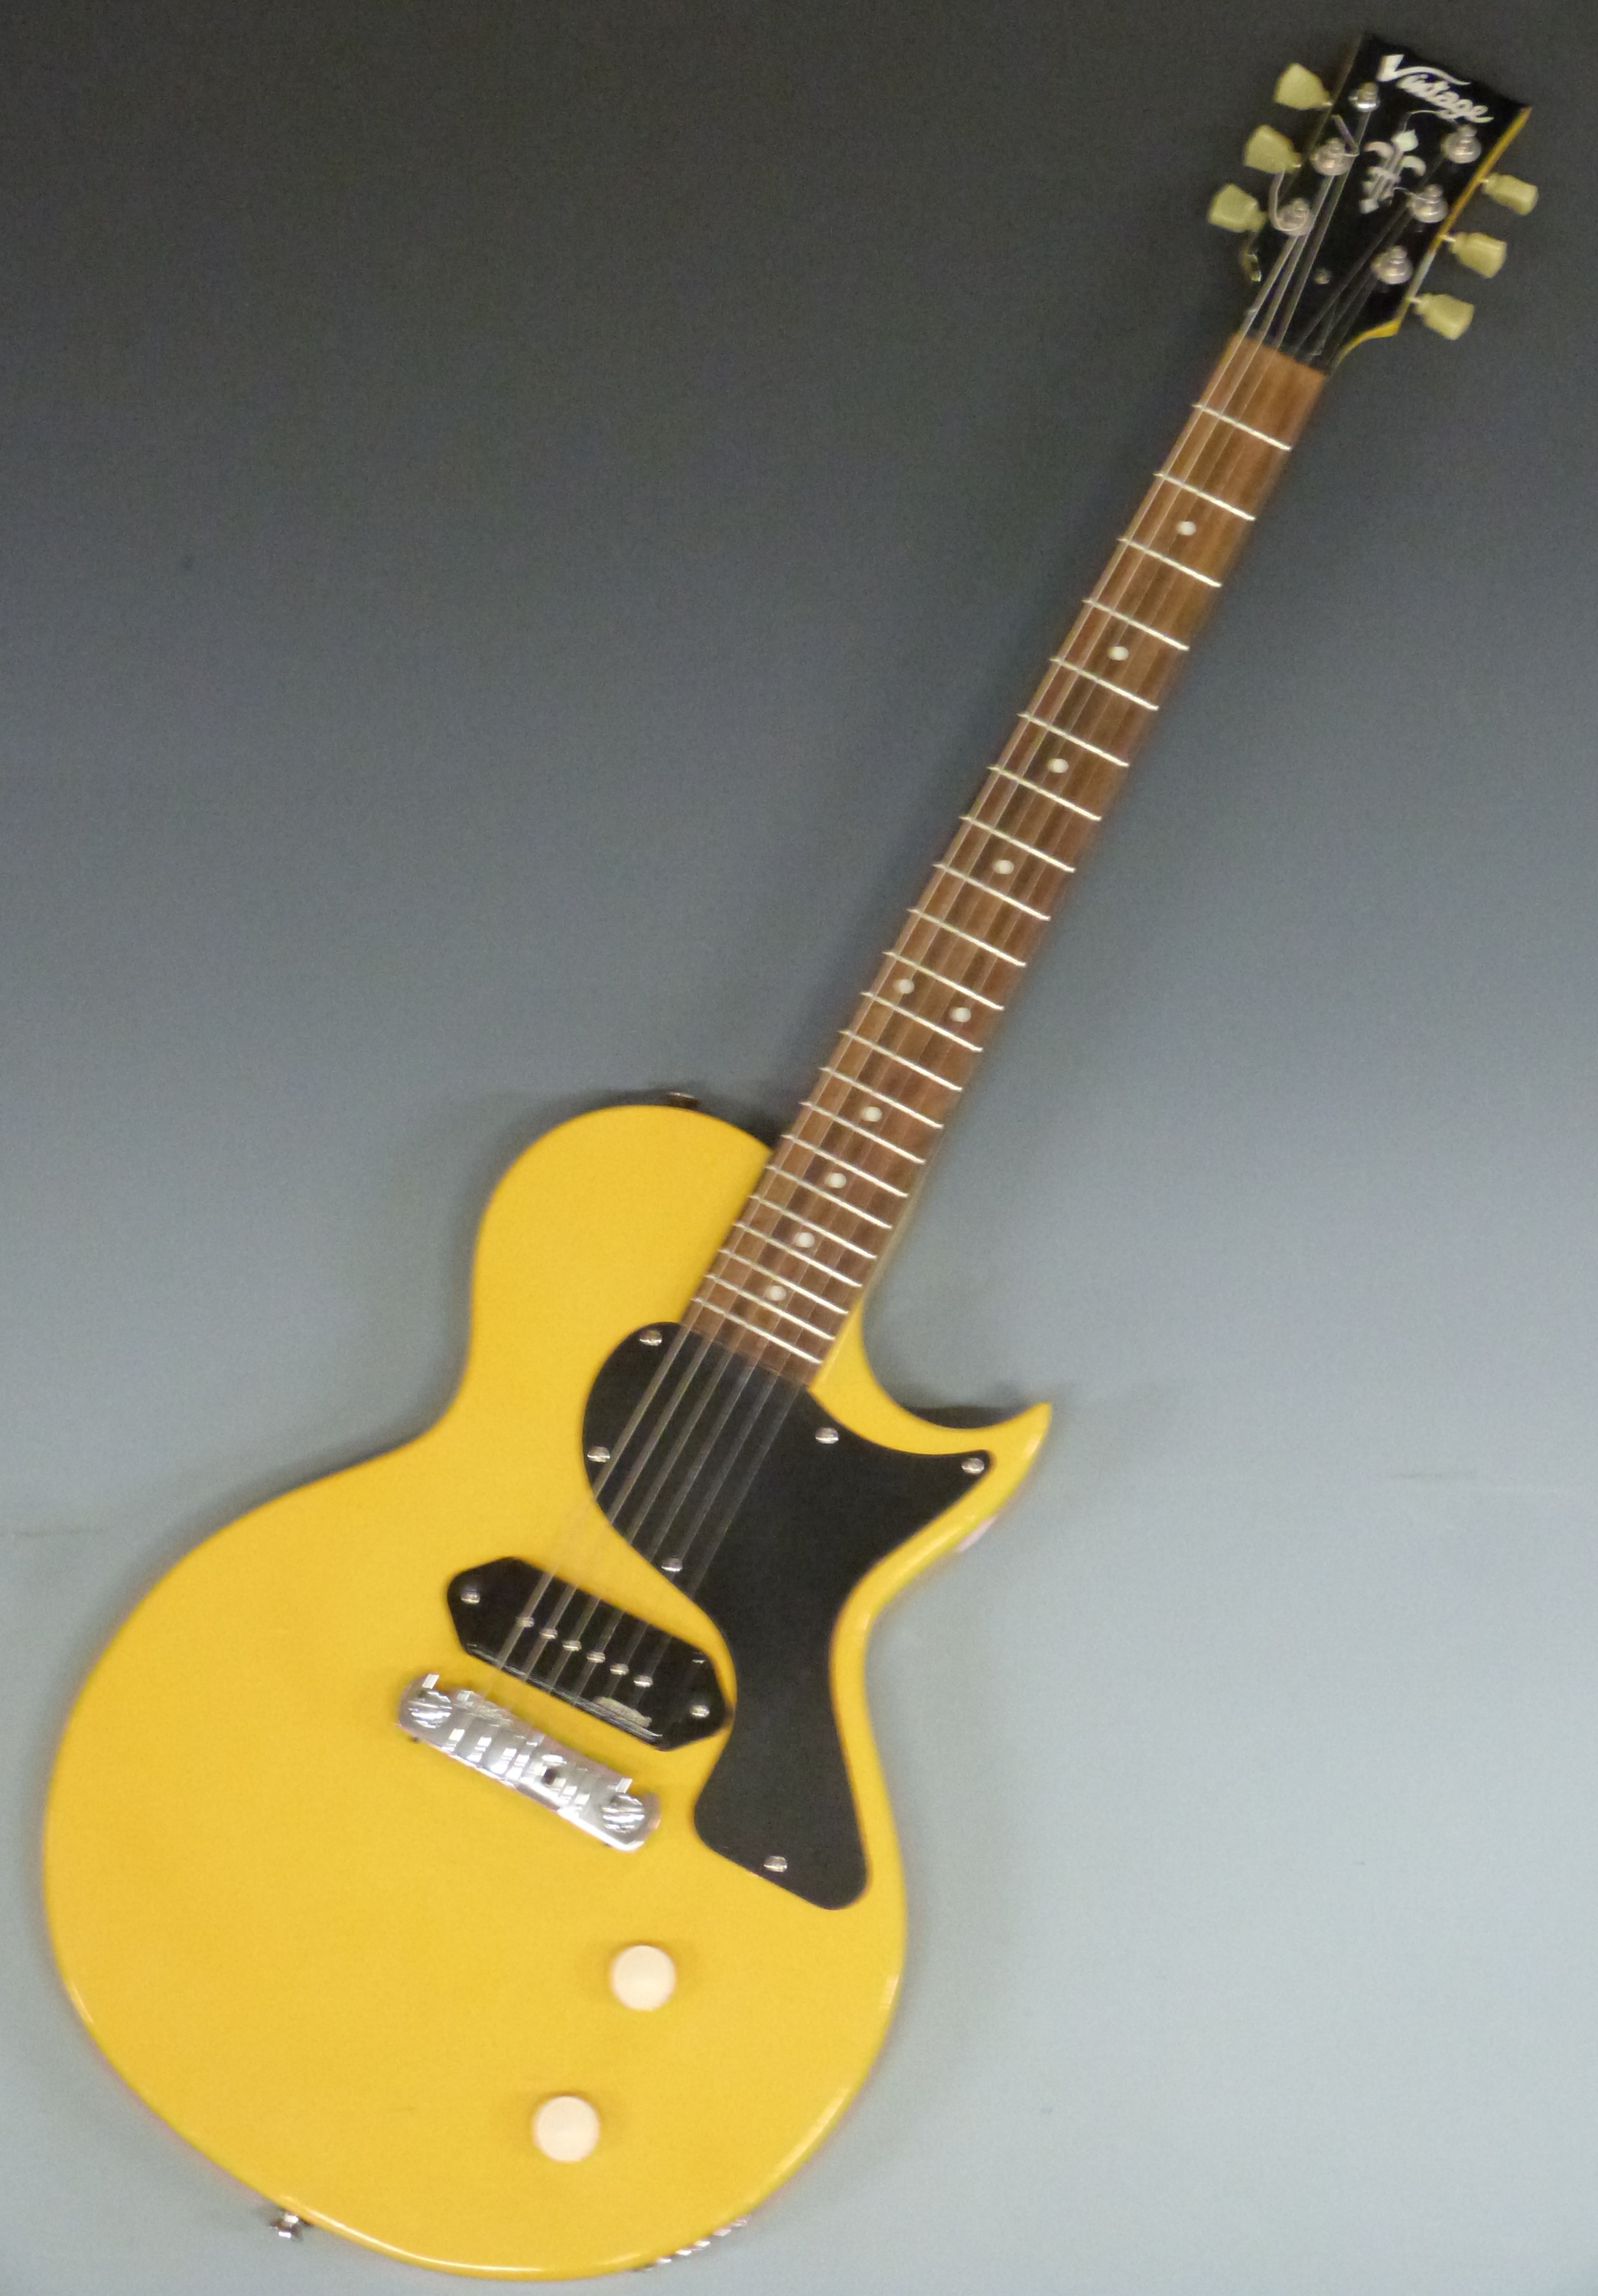 Electric guitar in yellow lacquered finish by Vintage, Wilkinson pick-up